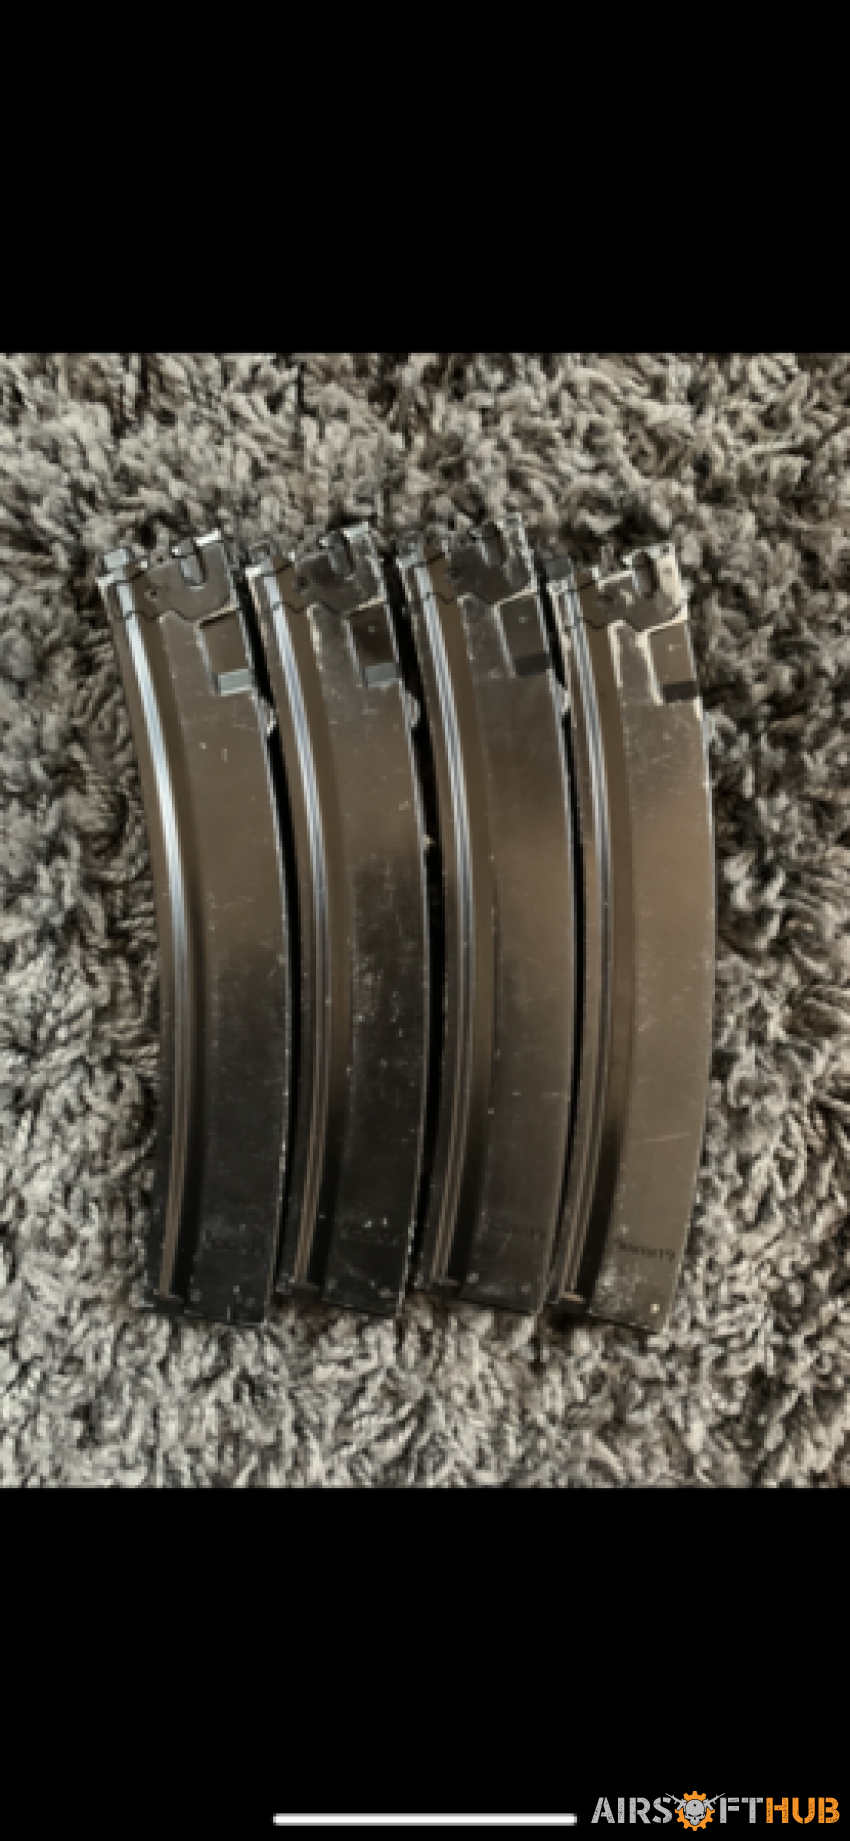 WE apache MP5 GBB mags - Used airsoft equipment